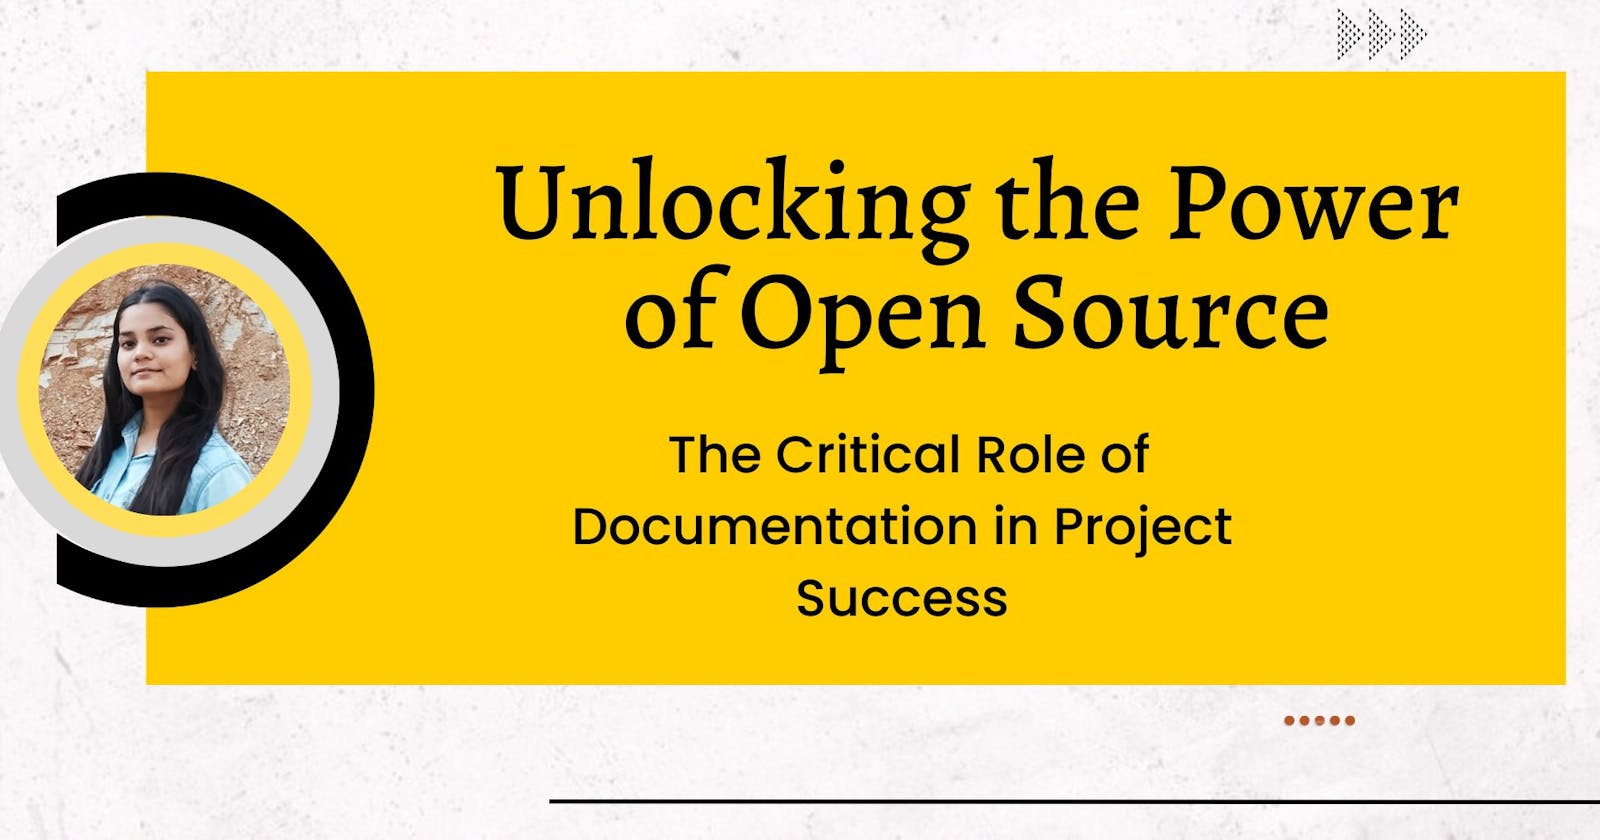 The Critical Role of Documentation in Project Success